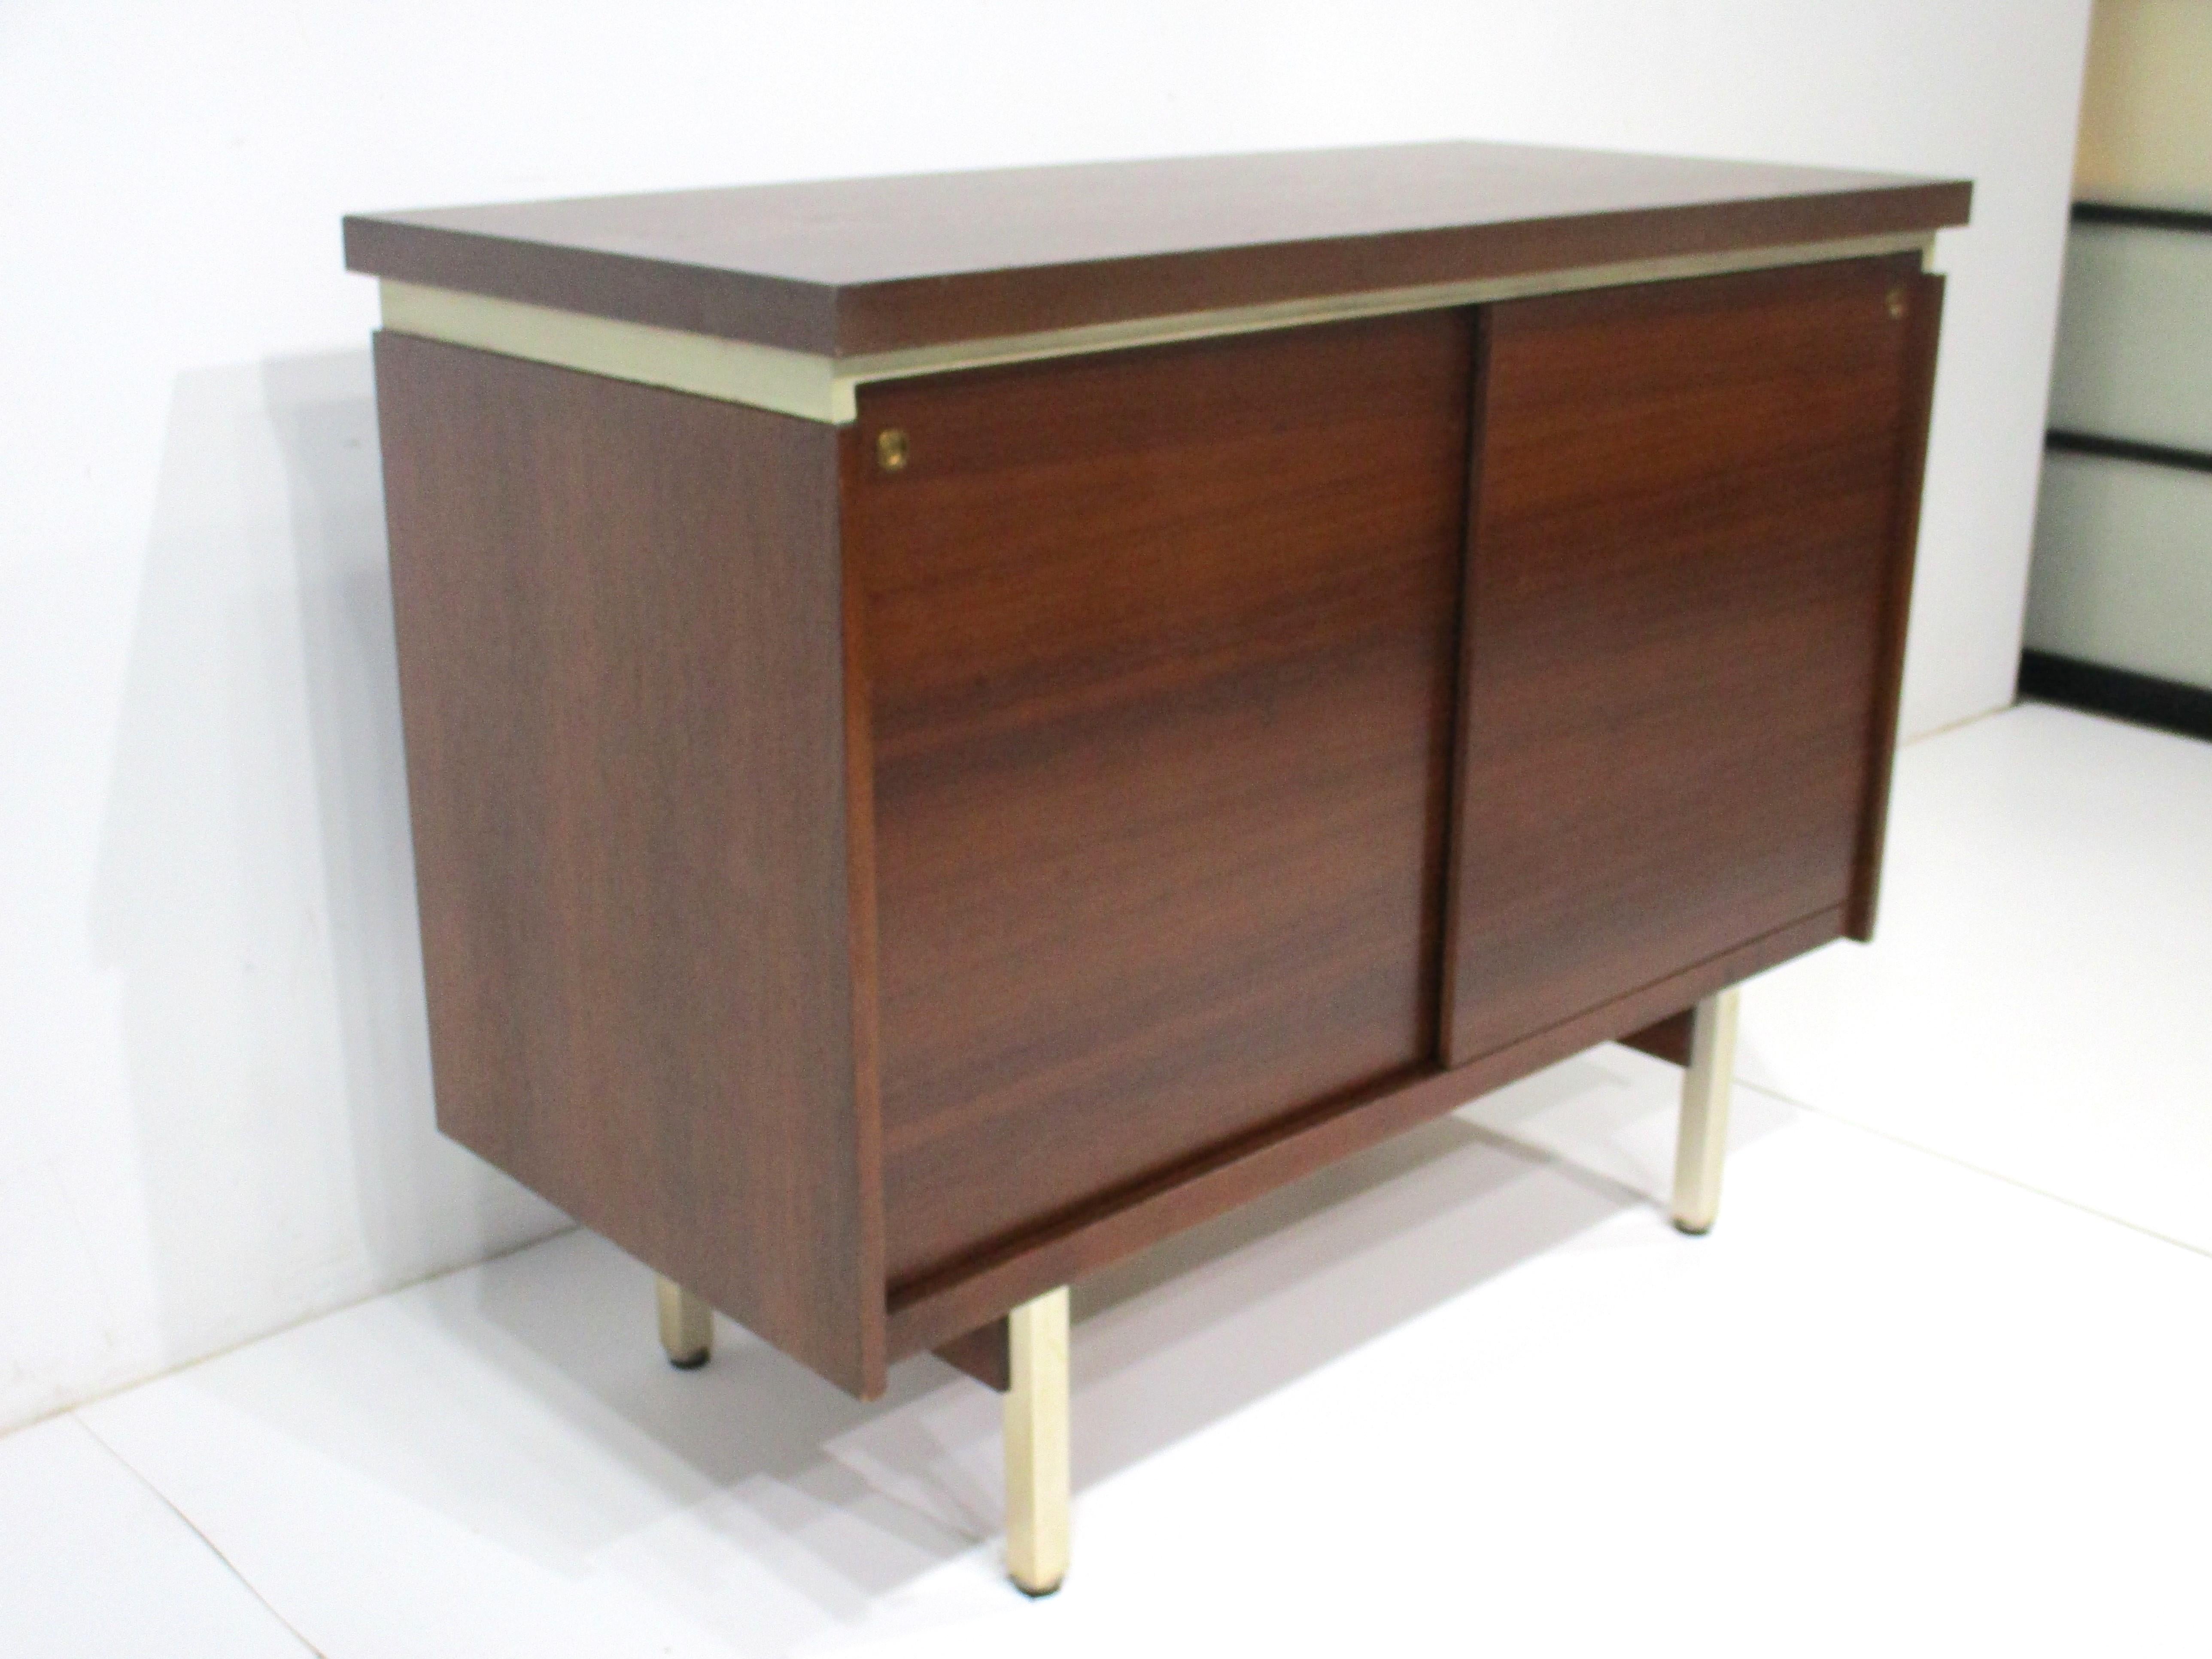 A small scale walnut two door credenza cabinet with two adjustable shelves sitting on gold brass toned metal legs . The piece has very nice graining of the wood front and on the finished backside . The top seems to float with a leatherette trim just